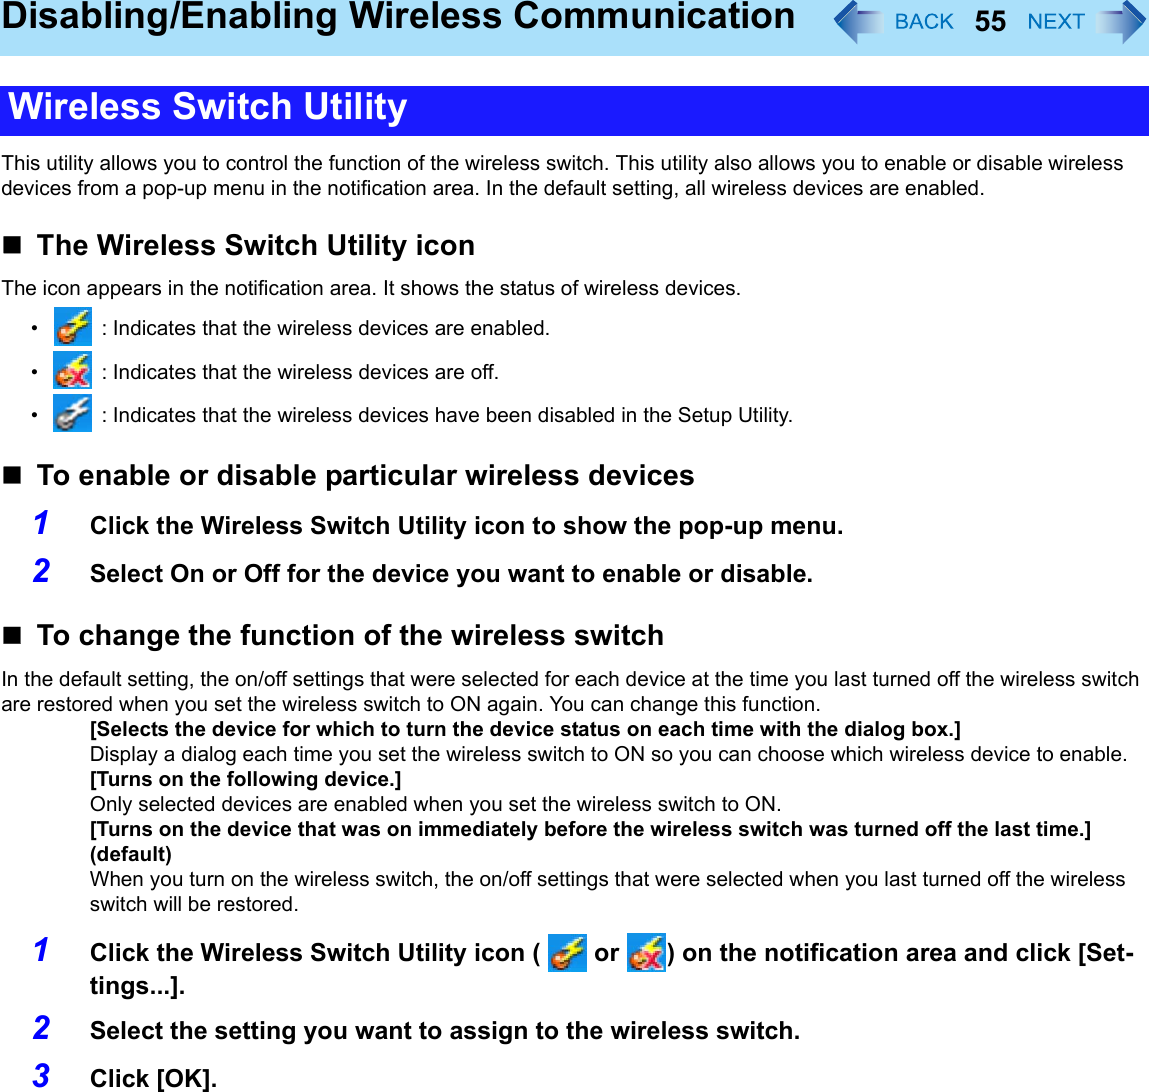 55Disabling/Enabling Wireless CommunicationThis utility allows you to control the function of the wireless switch. This utility also allows you to enable or disable wireless devices from a pop-up menu in the notification area. In the default setting, all wireless devices are enabled.The Wireless Switch Utility iconThe icon appears in the notification area. It shows the status of wireless devices.•  : Indicates that the wireless devices are enabled.•  : Indicates that the wireless devices are off.•  : Indicates that the wireless devices have been disabled in the Setup Utility.To enable or disable particular wireless devices1Click the Wireless Switch Utility icon to show the pop-up menu.2Select On or Off for the device you want to enable or disable.To change the function of the wireless switchIn the default setting, the on/off settings that were selected for each device at the time you last turned off the wireless switch are restored when you set the wireless switch to ON again. You can change this function.[Selects the device for which to turn the device status on each time with the dialog box.]Display a dialog each time you set the wireless switch to ON so you can choose which wireless device to enable.[Turns on the following device.]Only selected devices are enabled when you set the wireless switch to ON.[Turns on the device that was on immediately before the wireless switch was turned off the last time.] (default)When you turn on the wireless switch, the on/off settings that were selected when you last turned off the wireless switch will be restored.1Click the Wireless Switch Utility icon (   or  ) on the notification area and click [Set-tings...].2Select the setting you want to assign to the wireless switch.3Click [OK].Wireless Switch Utility